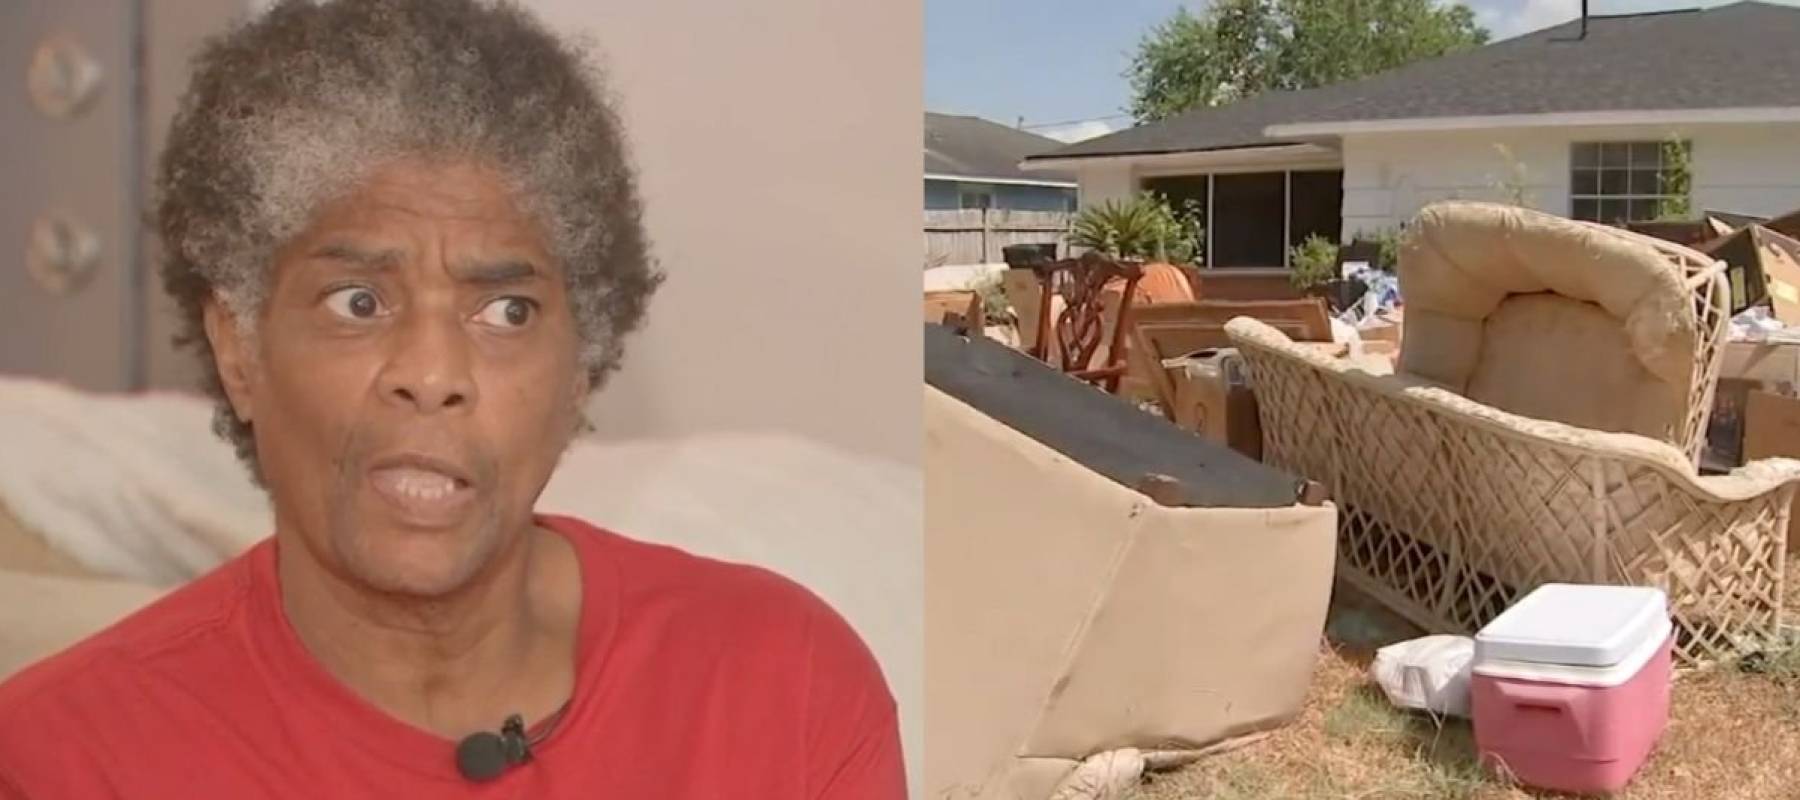 Photos seen side-by-side of Wanda Jackson looking very angry, a pile of furniture on her front lawn.